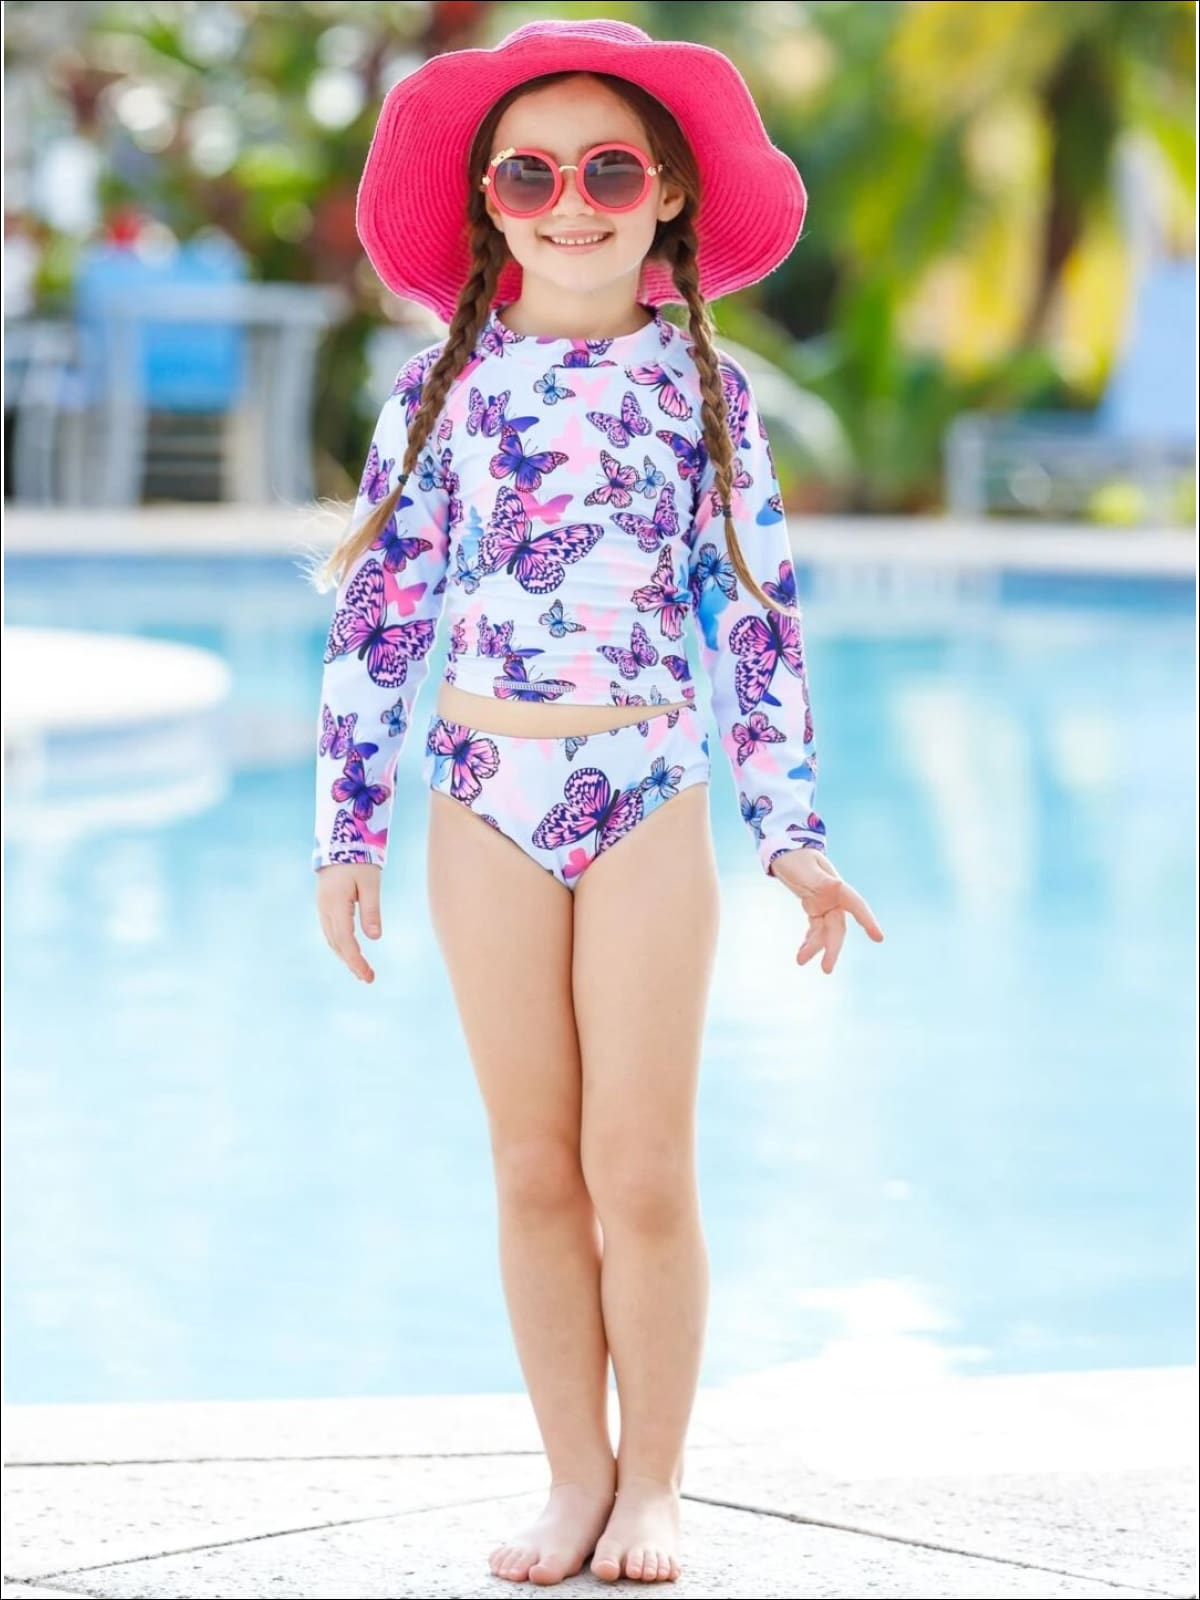 Mia Belle Girls on Instagram: “This swimsuit = add to cart moment 🌸🏝🌞  Shop Girls Precious Flower Rash Guard Tw…